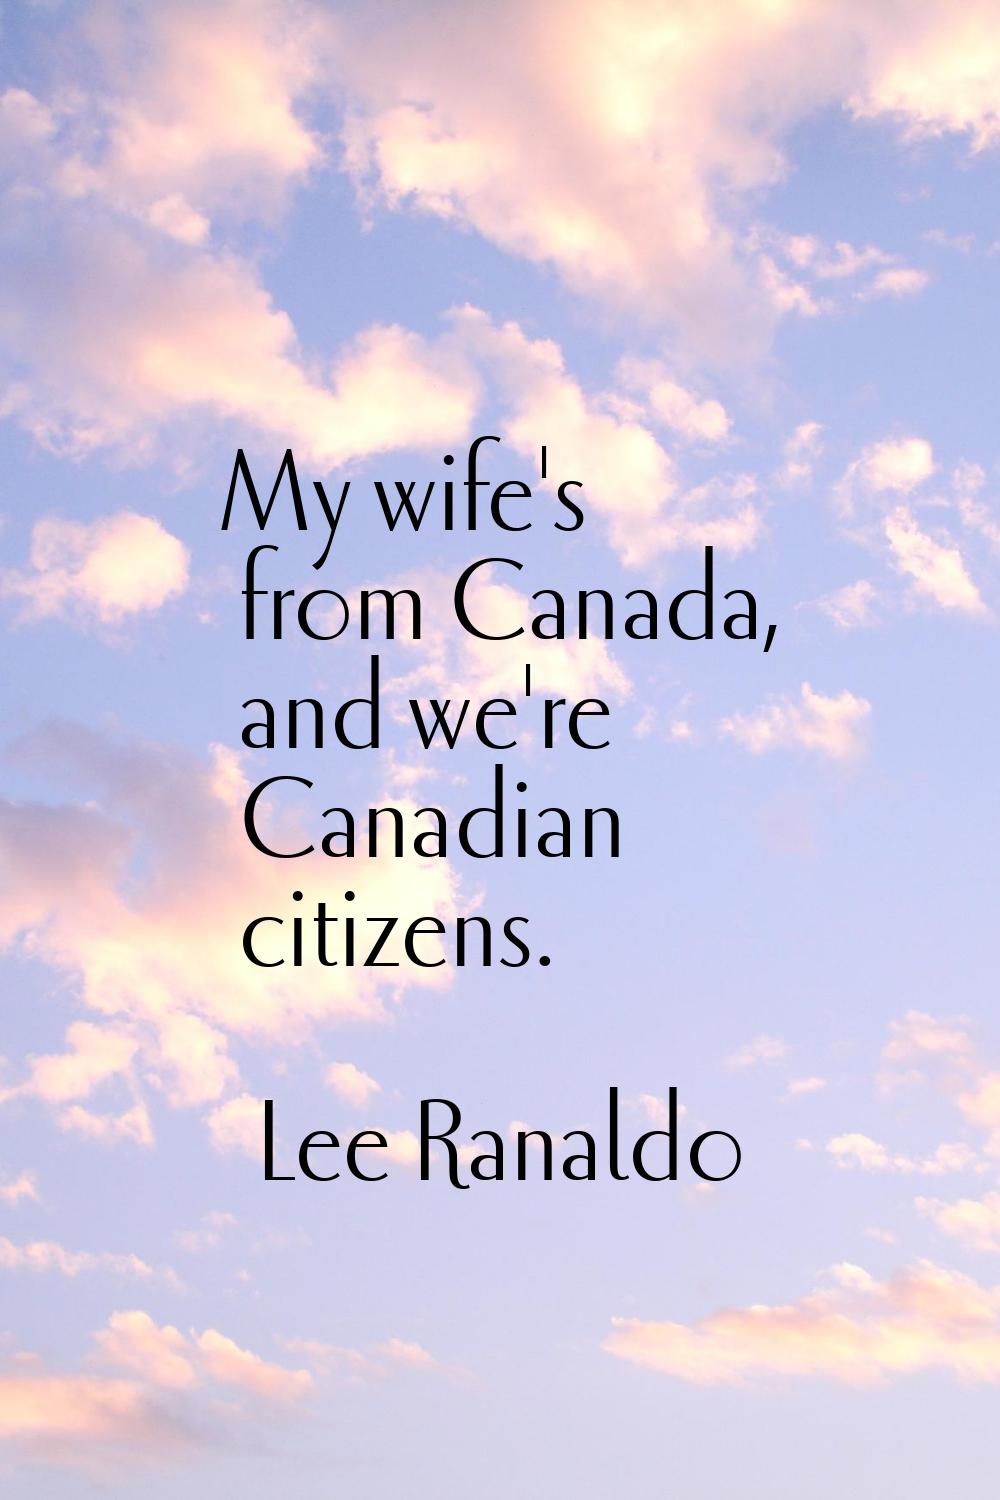 My wife's from Canada, and we're Canadian citizens.